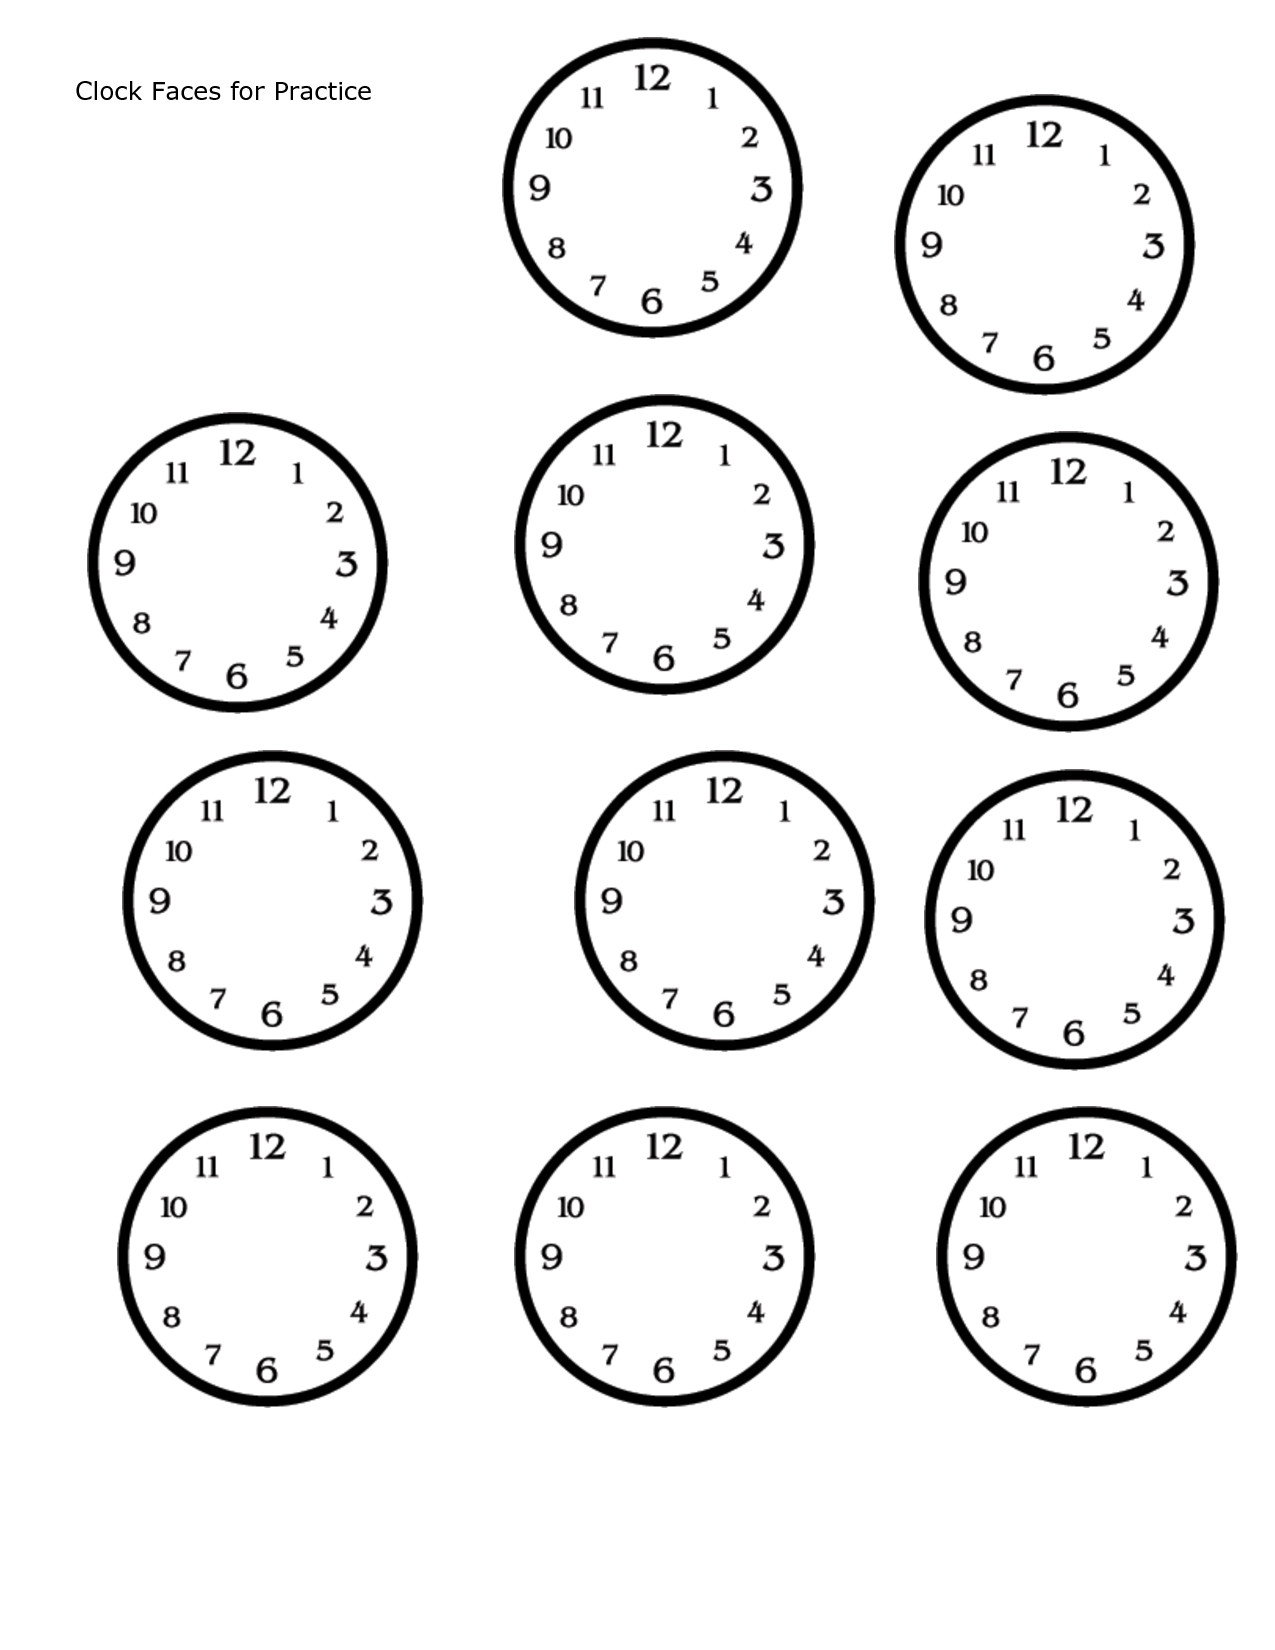 Clock Face Template Printable from clipart-library.com